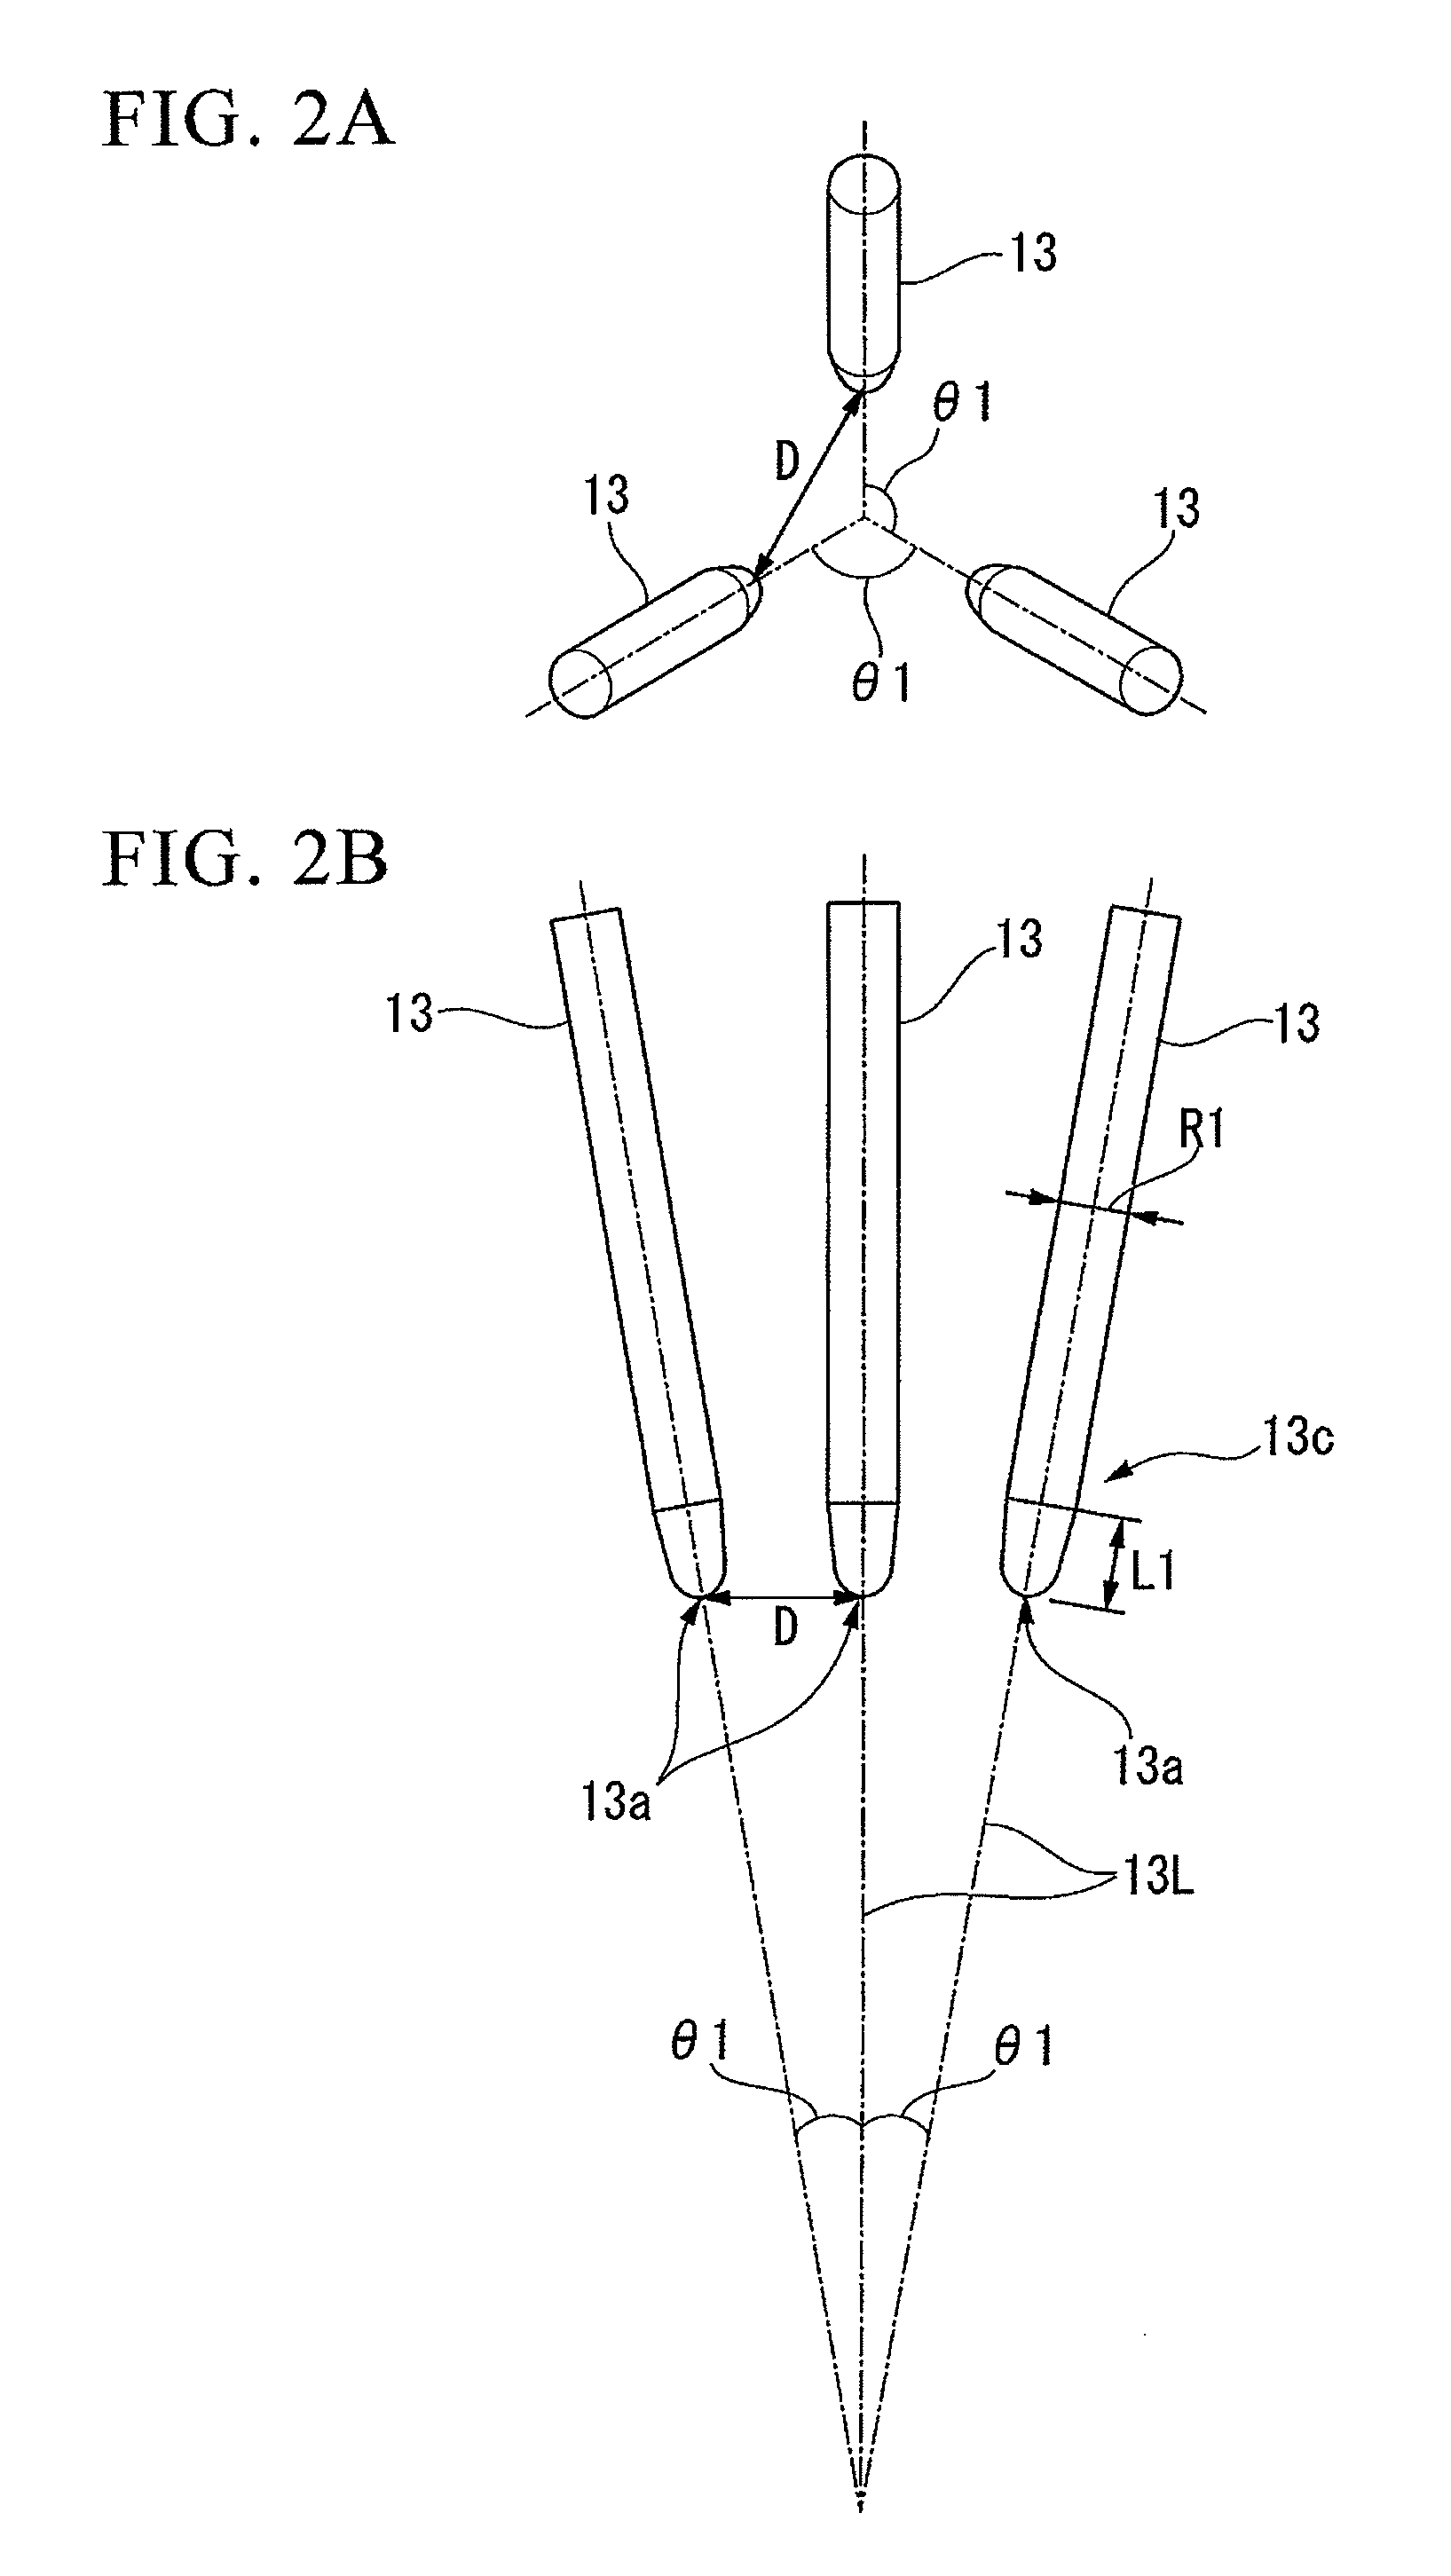 Method and apparatus for manufacturing fused silica crucible, and the fused silica crucible